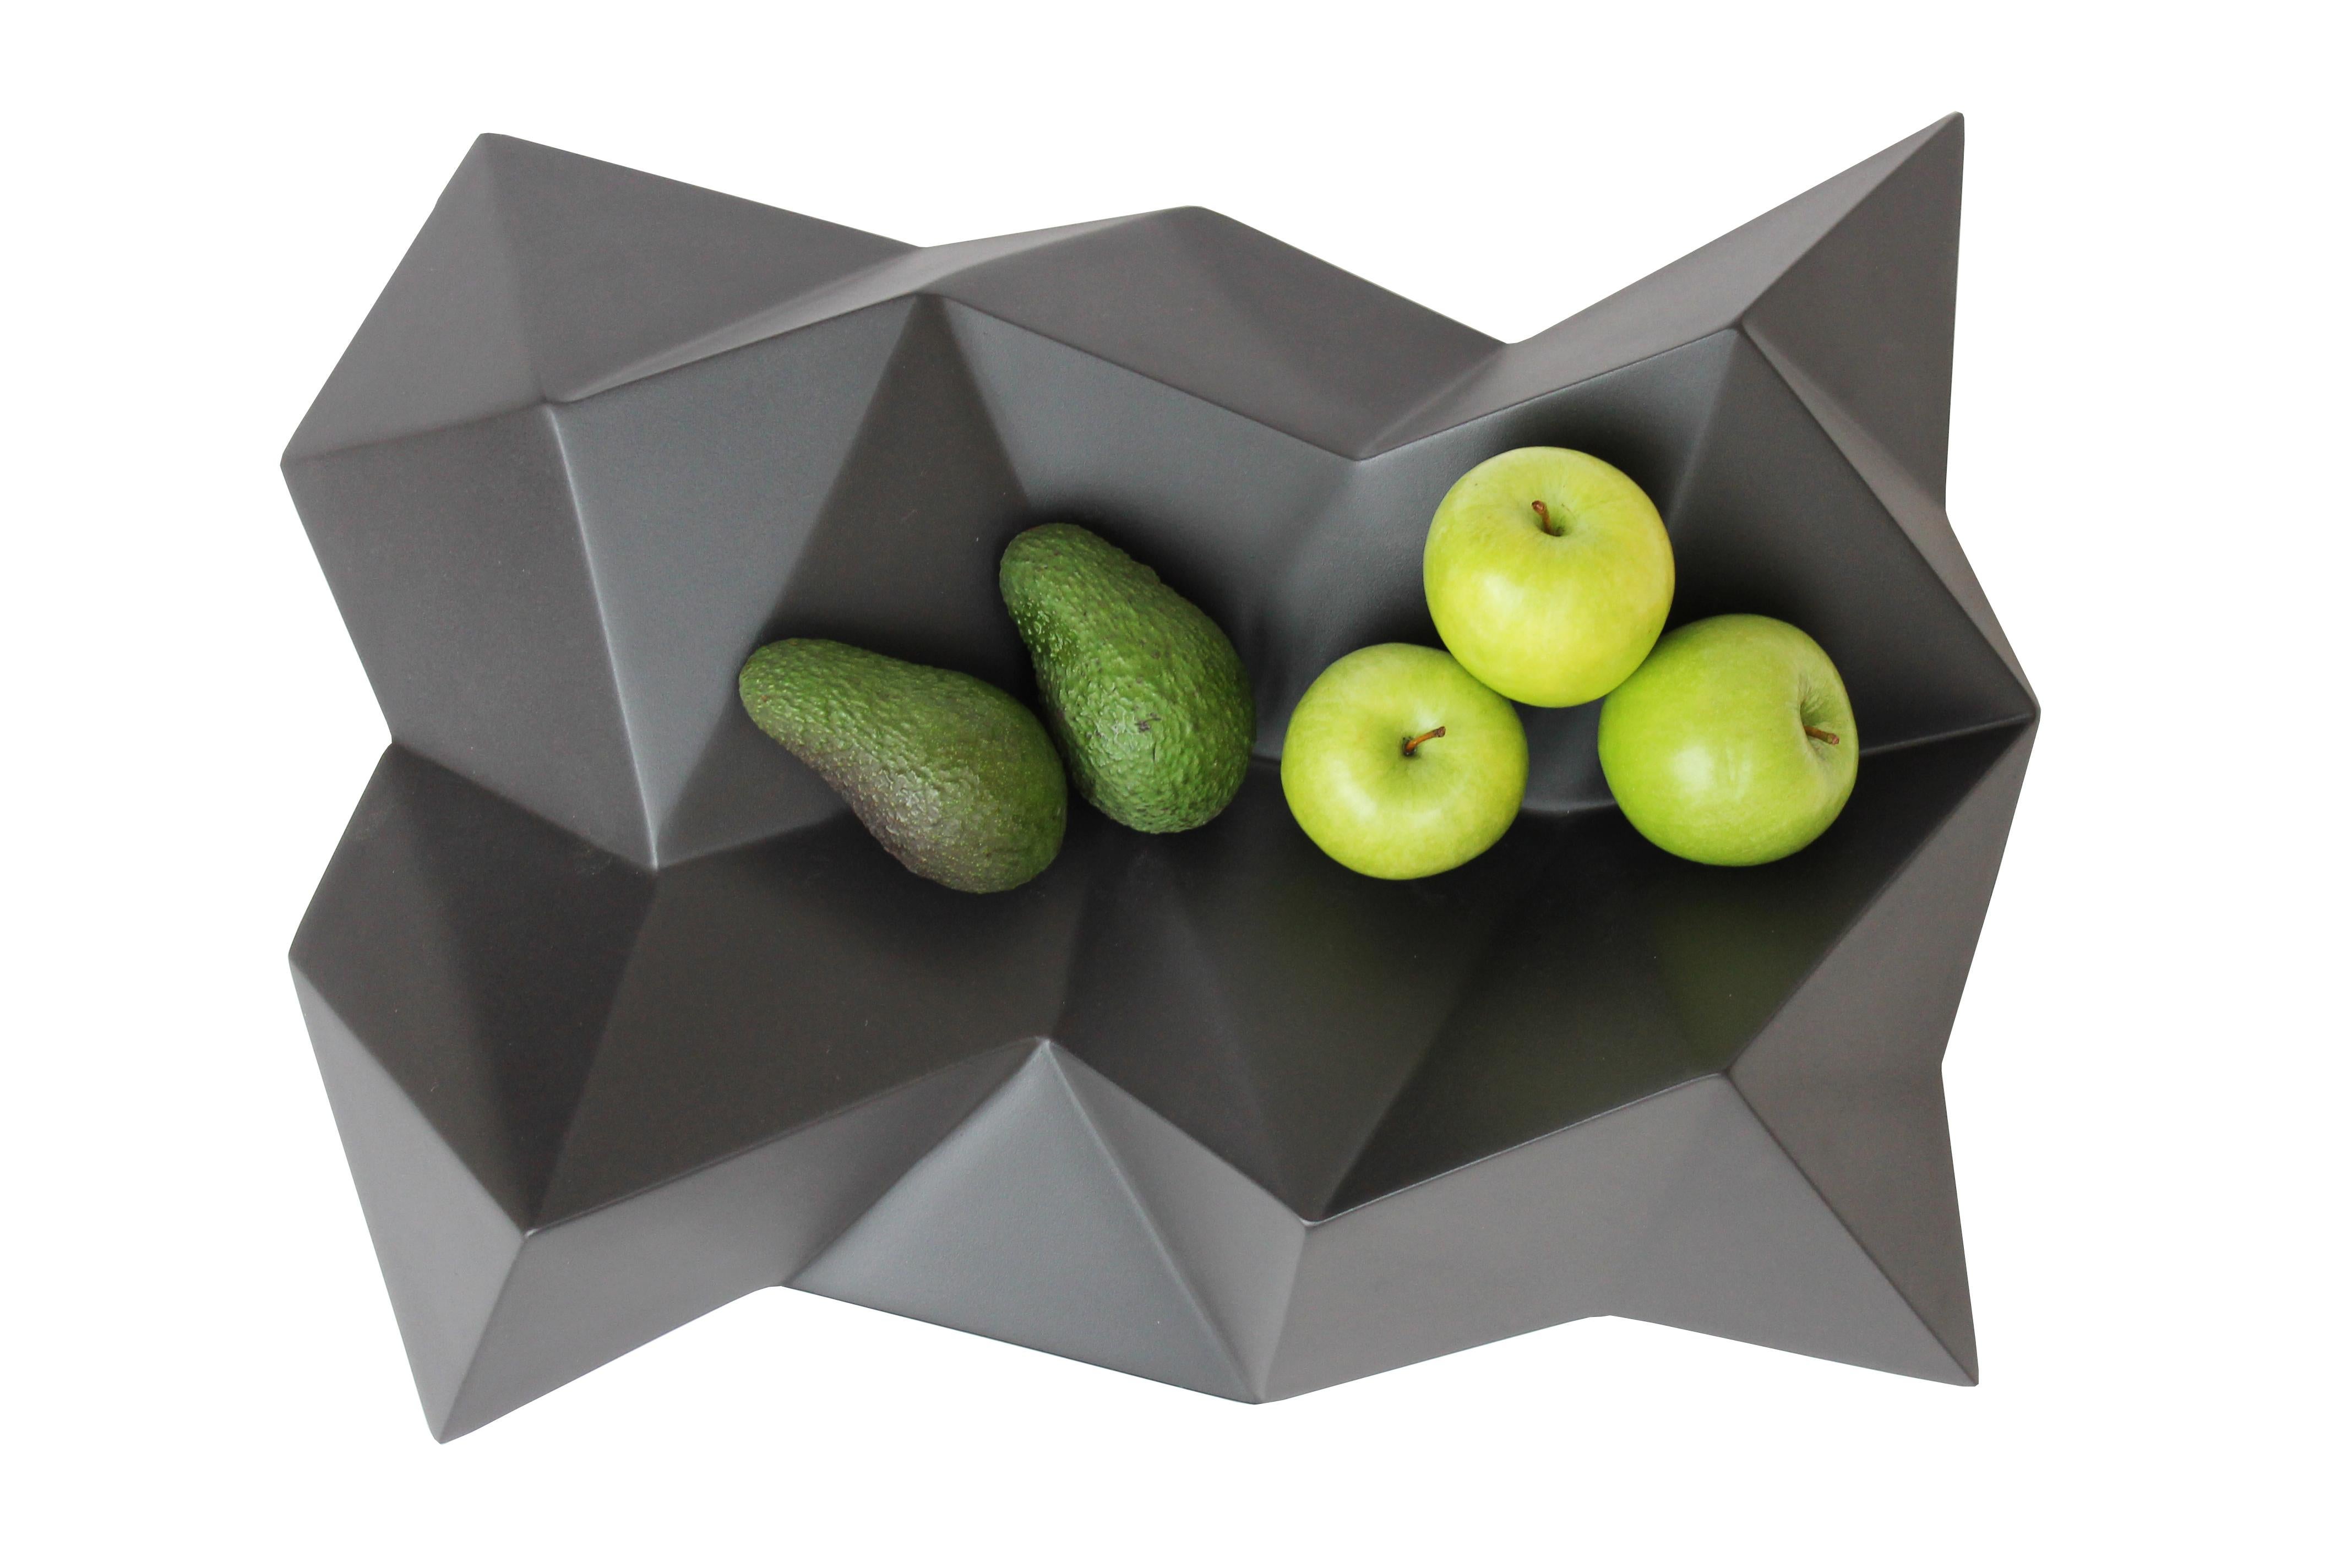    The formal concept of fruit bowl cordilheira derives from the distortion in 3 axes of a grid of triangles, which results in a complex geometry of recesses and protrusions for storage. The name cordilheira (mountain range in English) is precisely